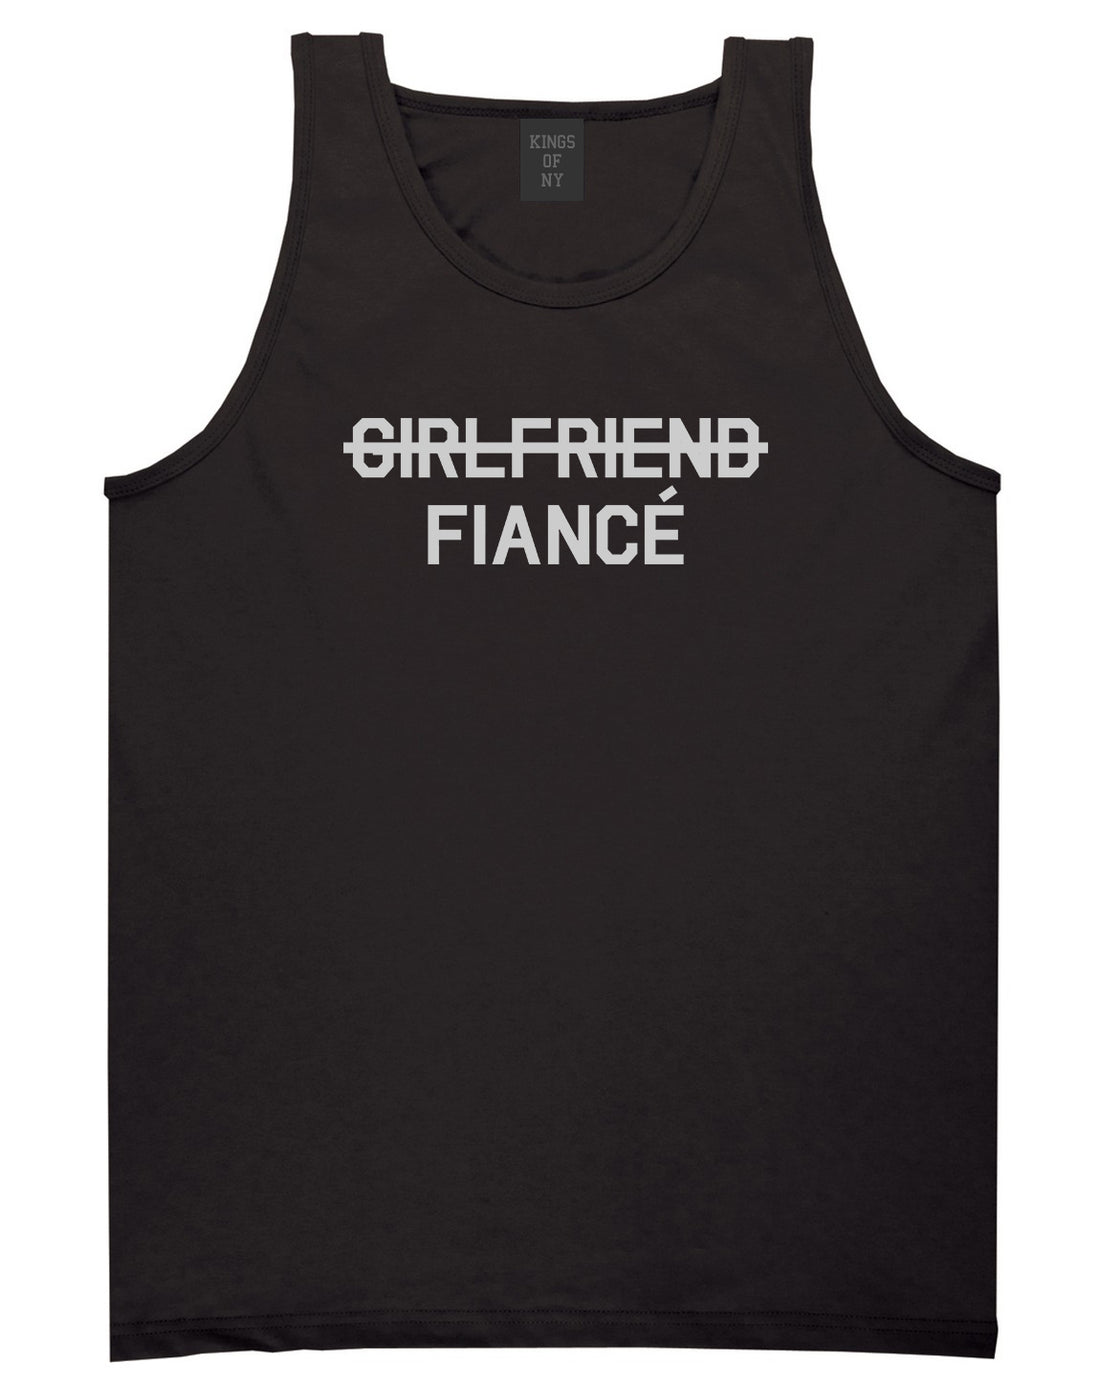 Girlfriend Fiance Engagement Mens Black Tank Top Shirt by KINGS OF NY